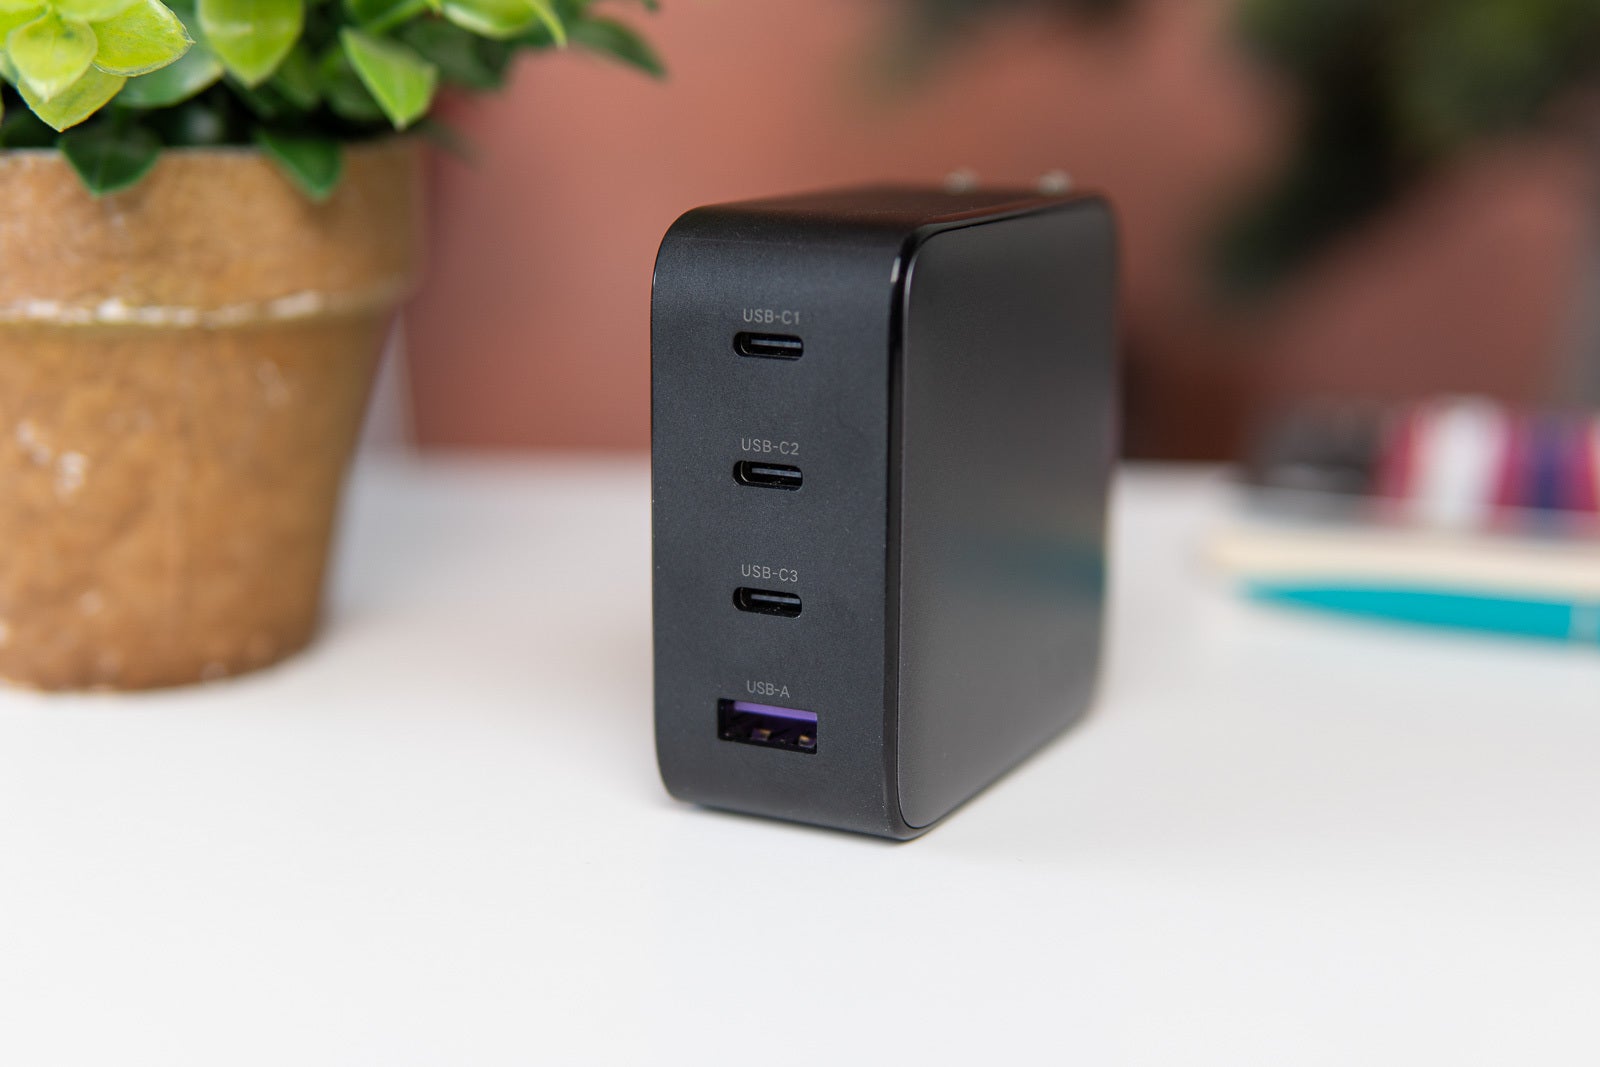 The end of your charging troubles: Ugreen GaN 100 W fast charging hub!